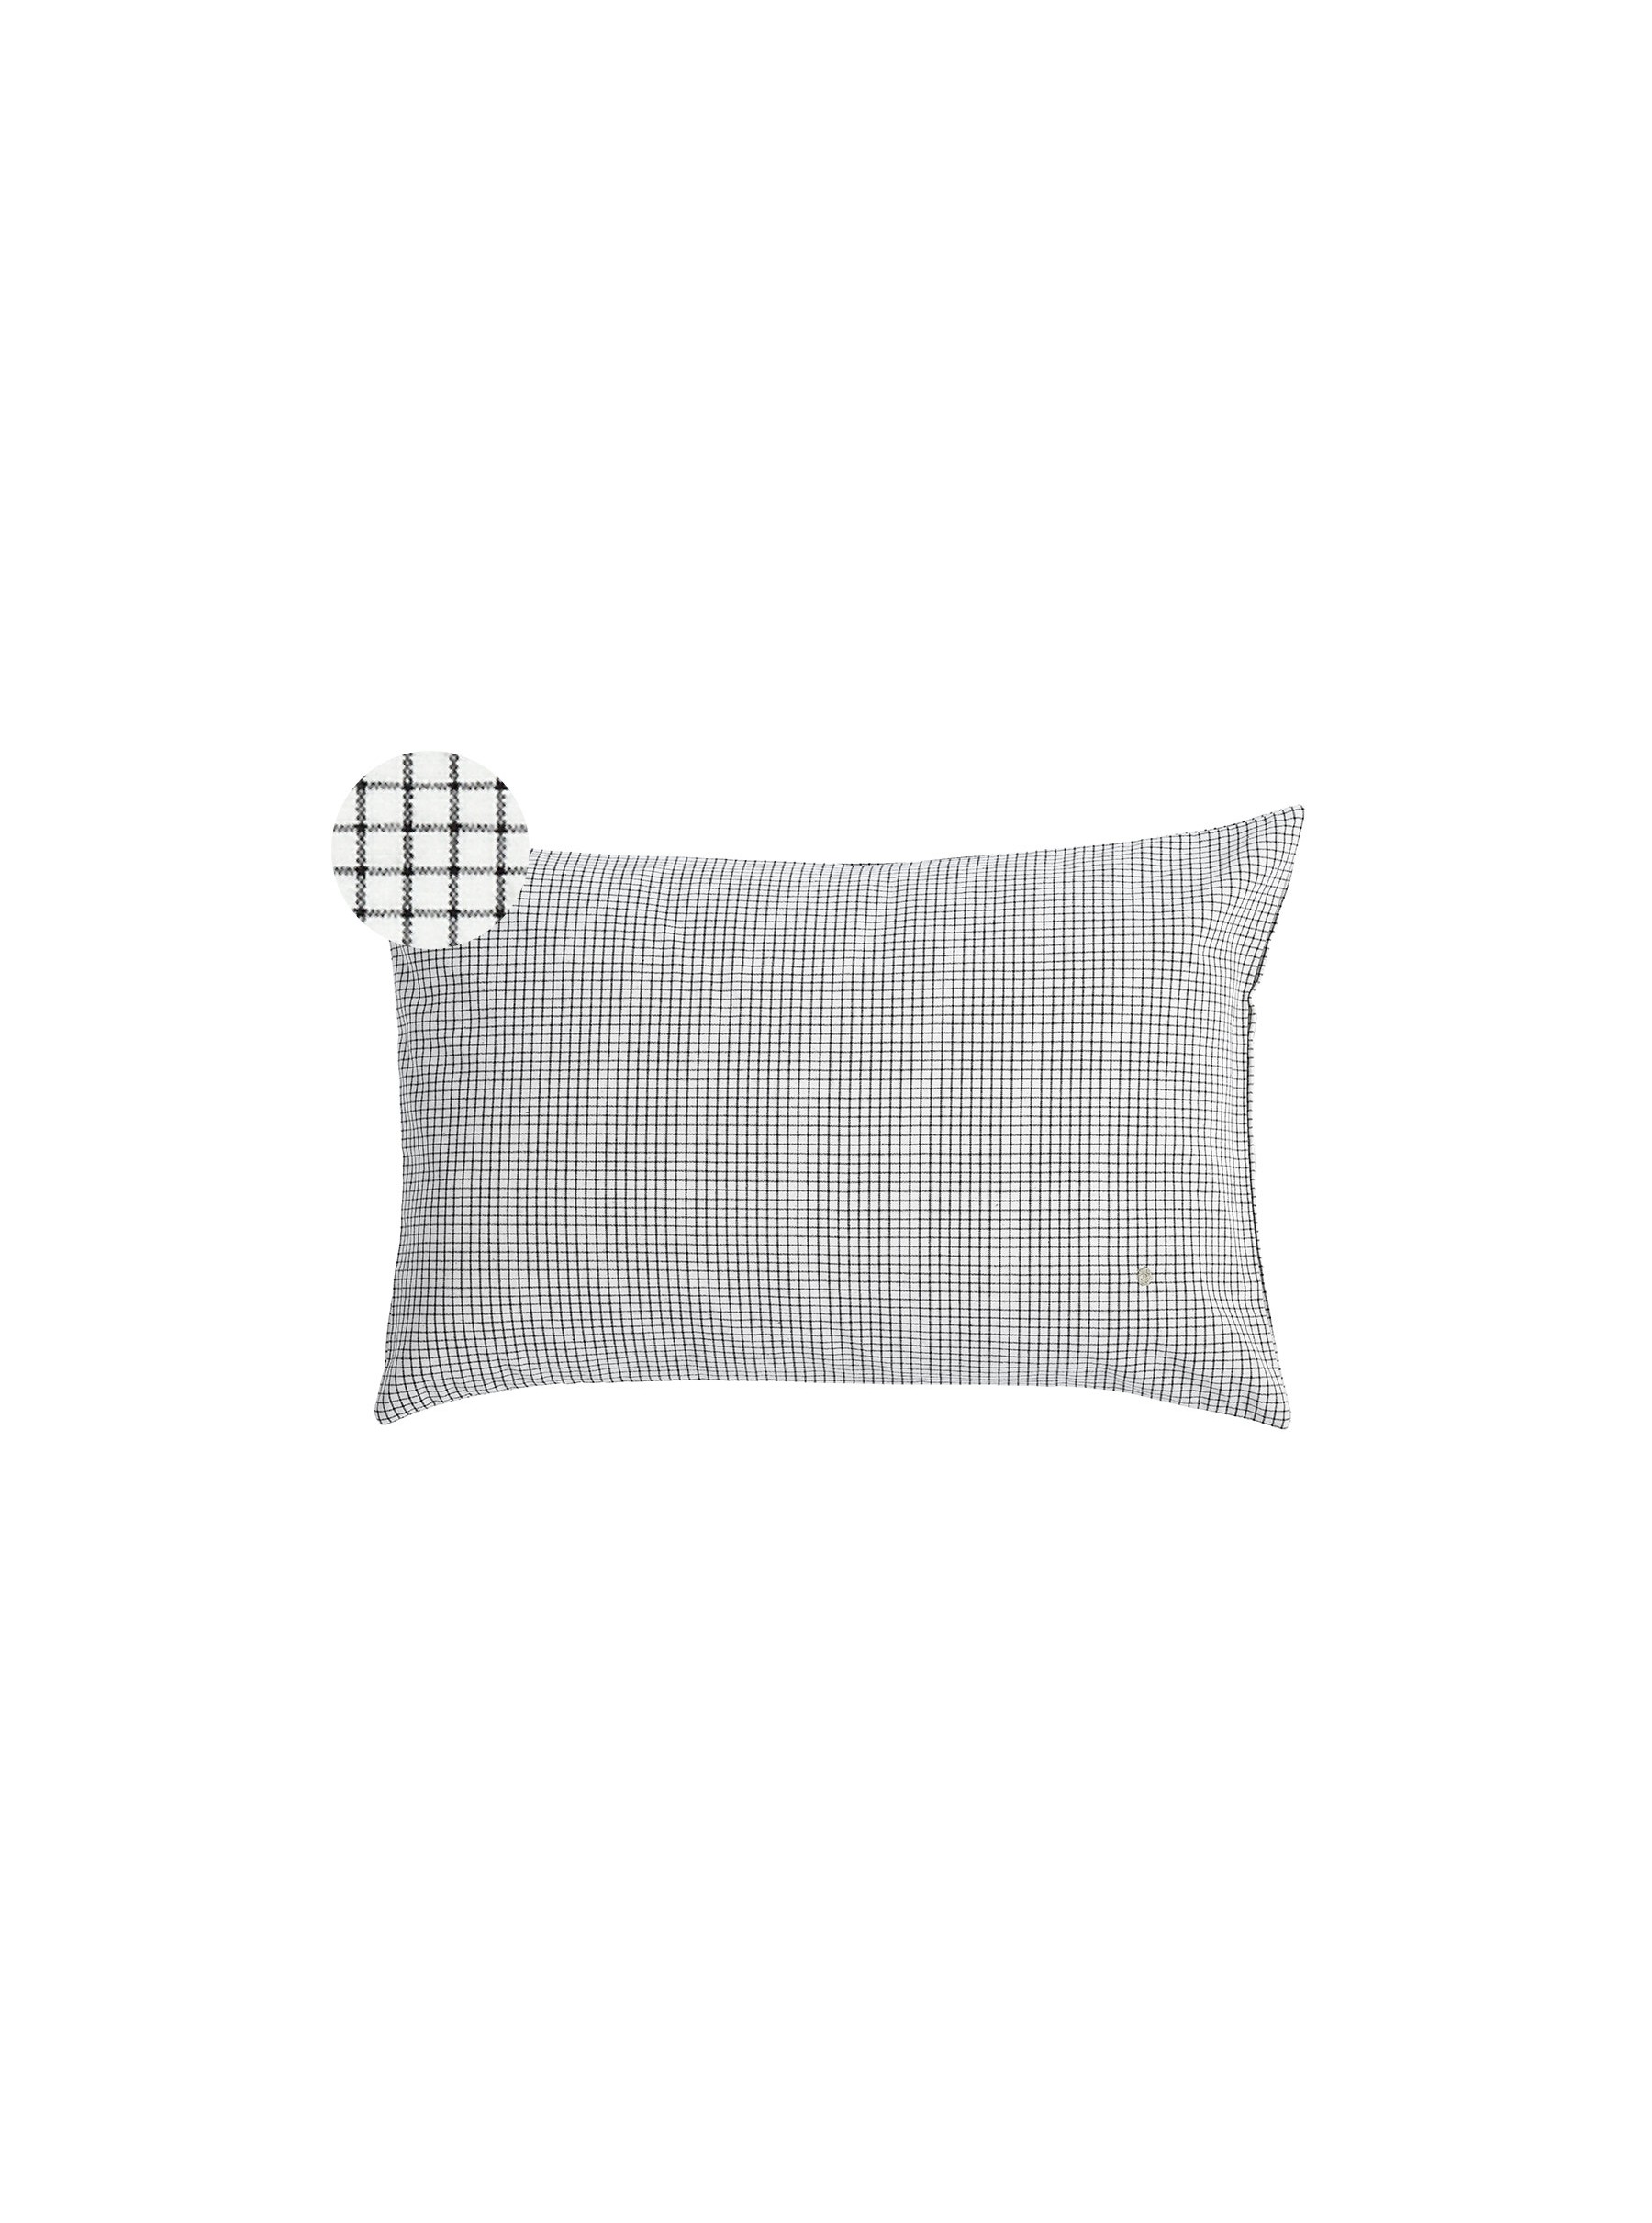 CUSHION COVER GUSTAVE 40